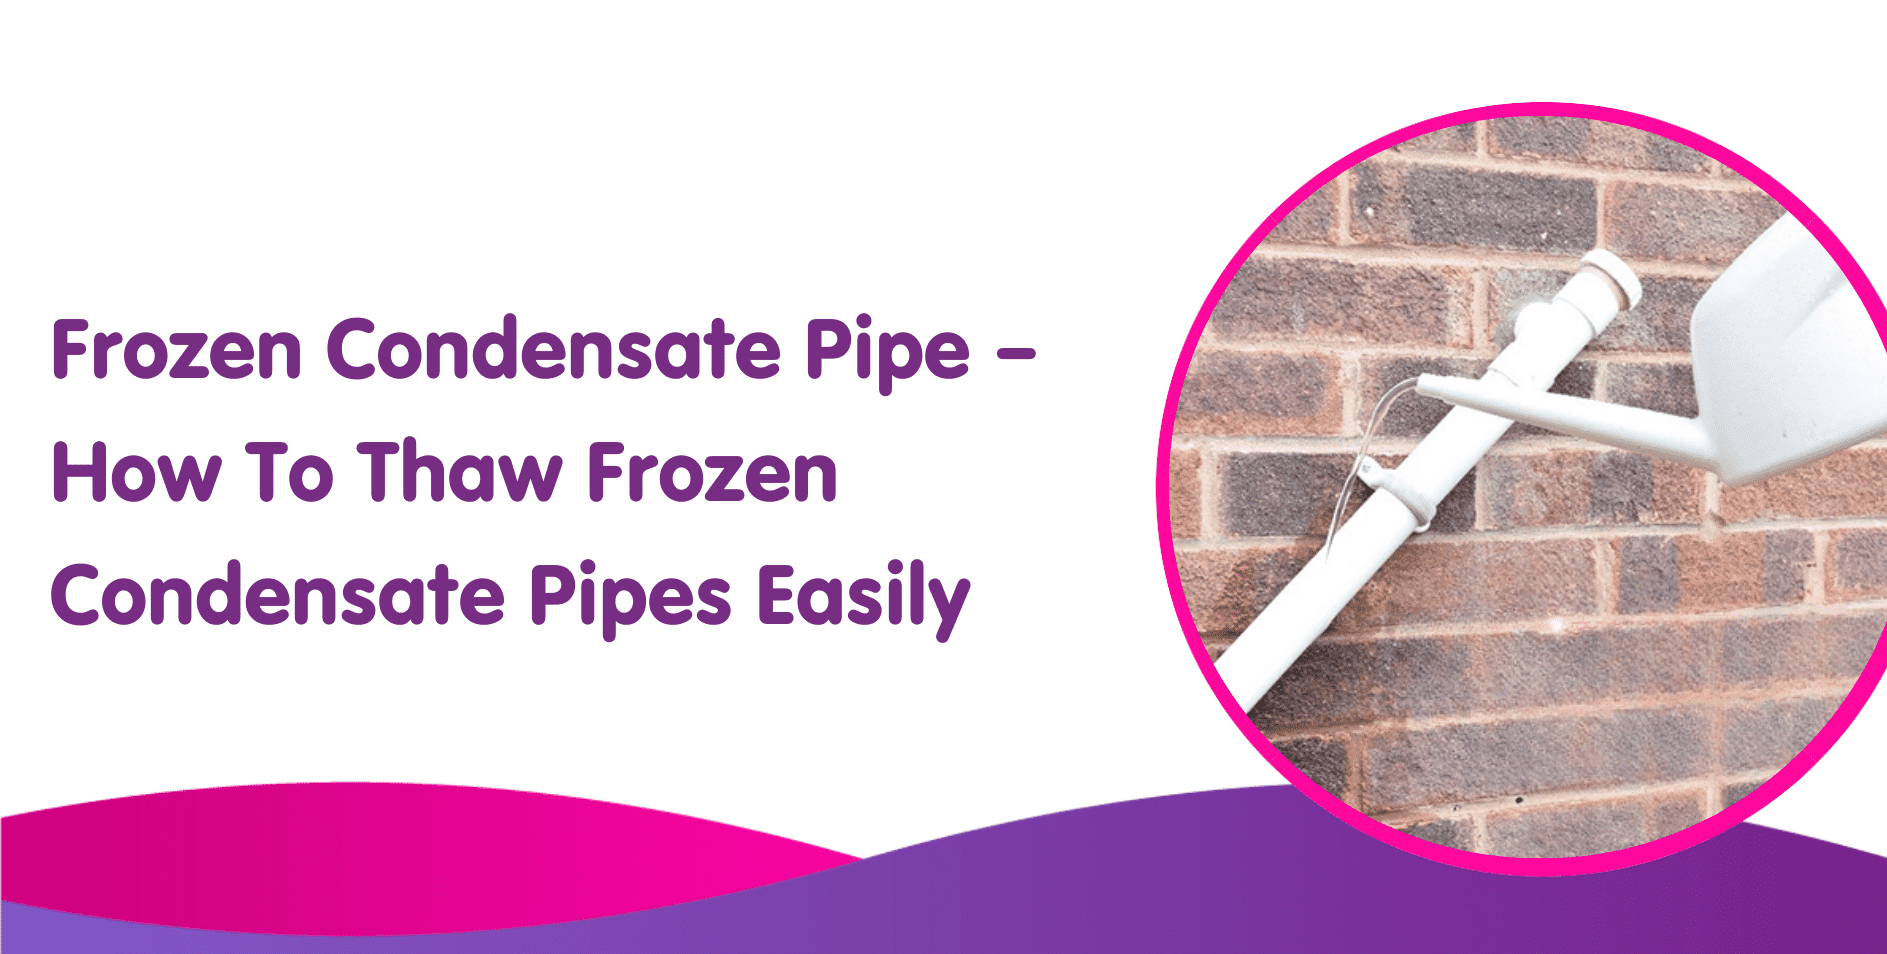 Frozen Condensate Pipe and How To Thaw Frozen Condensate Pipes Easily